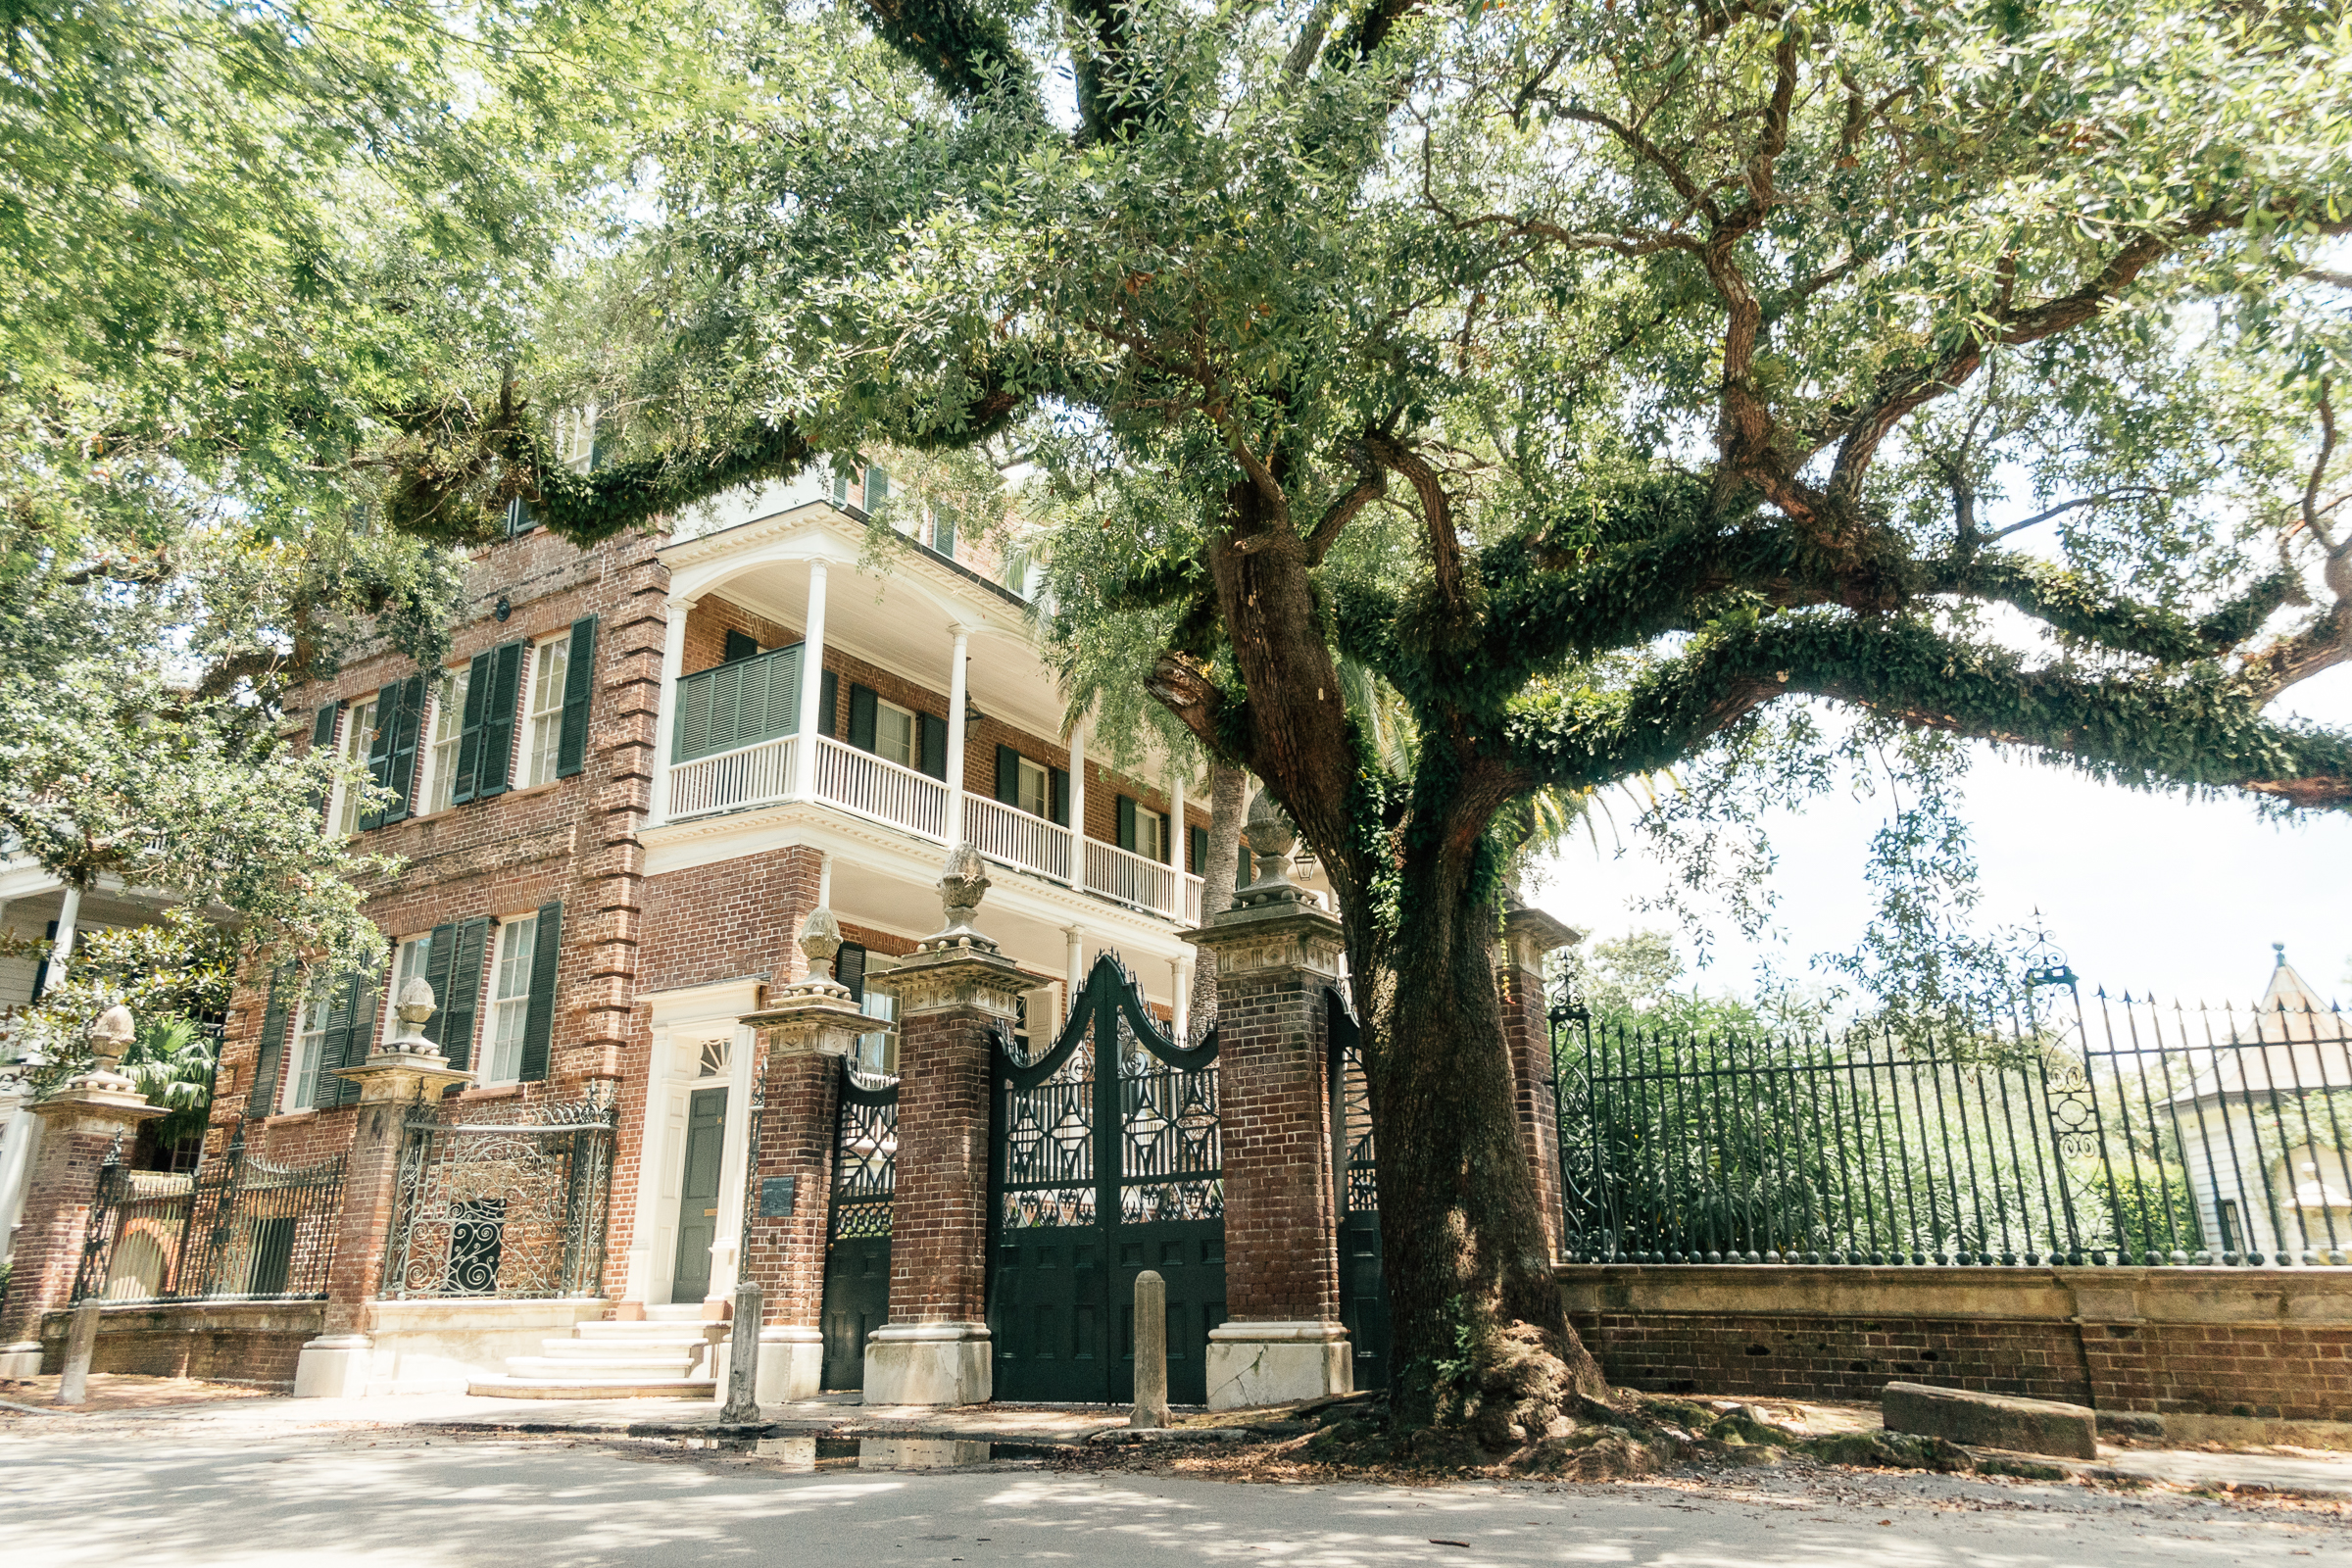 The Pineapple House in Charleston, SC